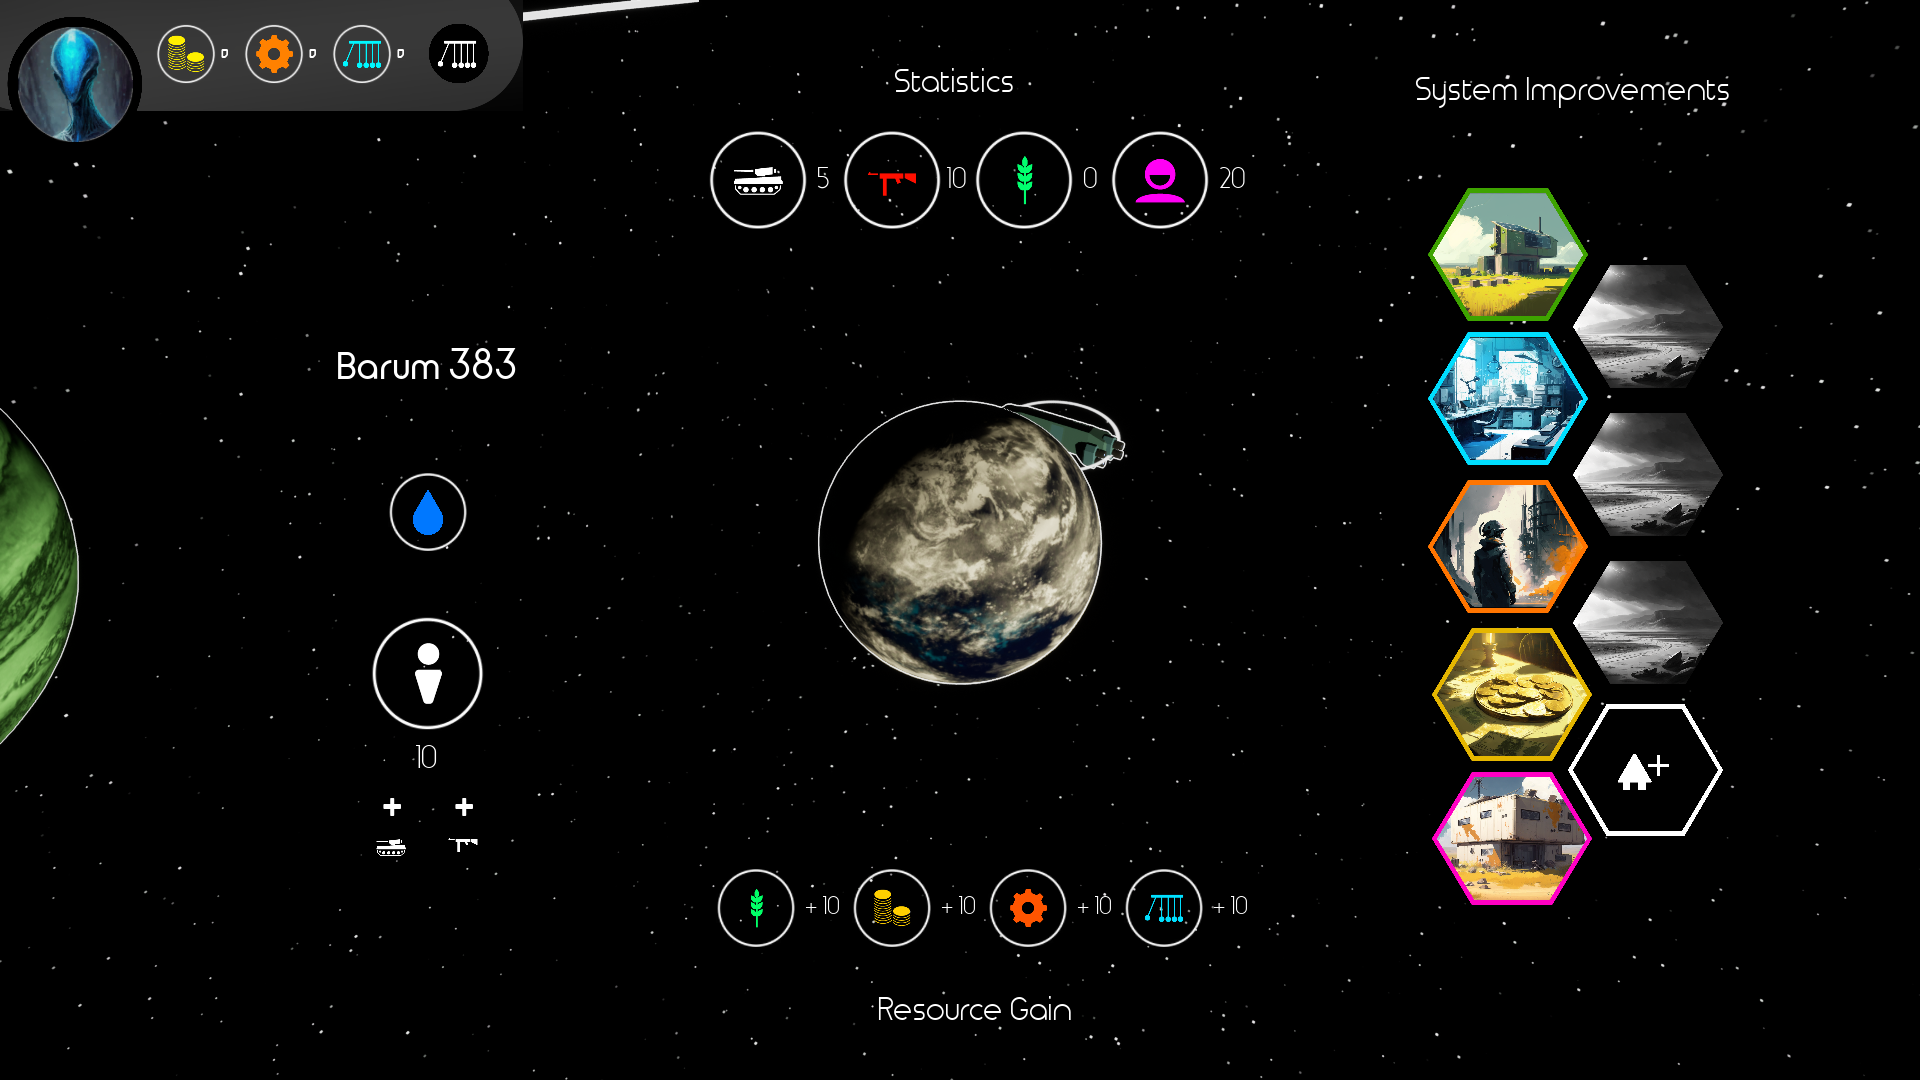 A screenshot depicting a procedurally generated planet from the Sci-Fi 4X game "Barum 383".